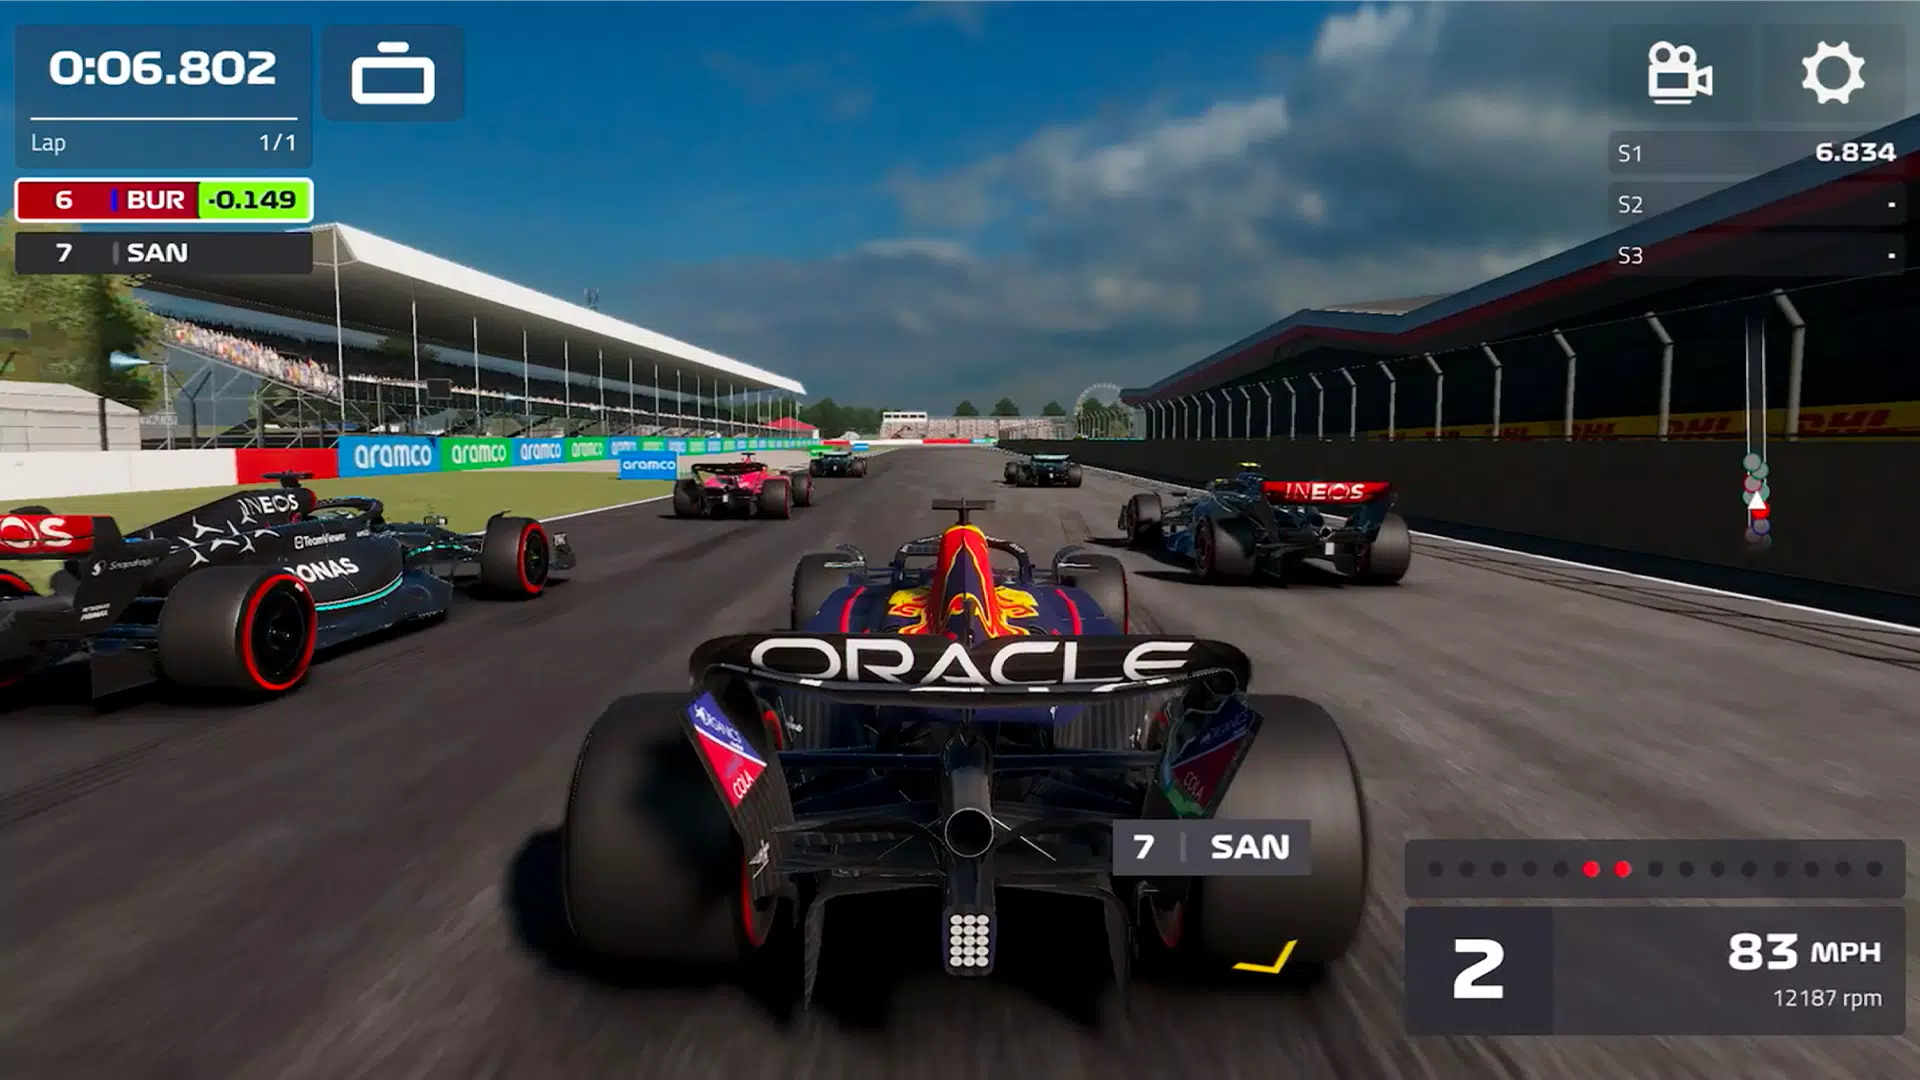 F1 22 Game APK 5.3.15 Download For Android Latest Version